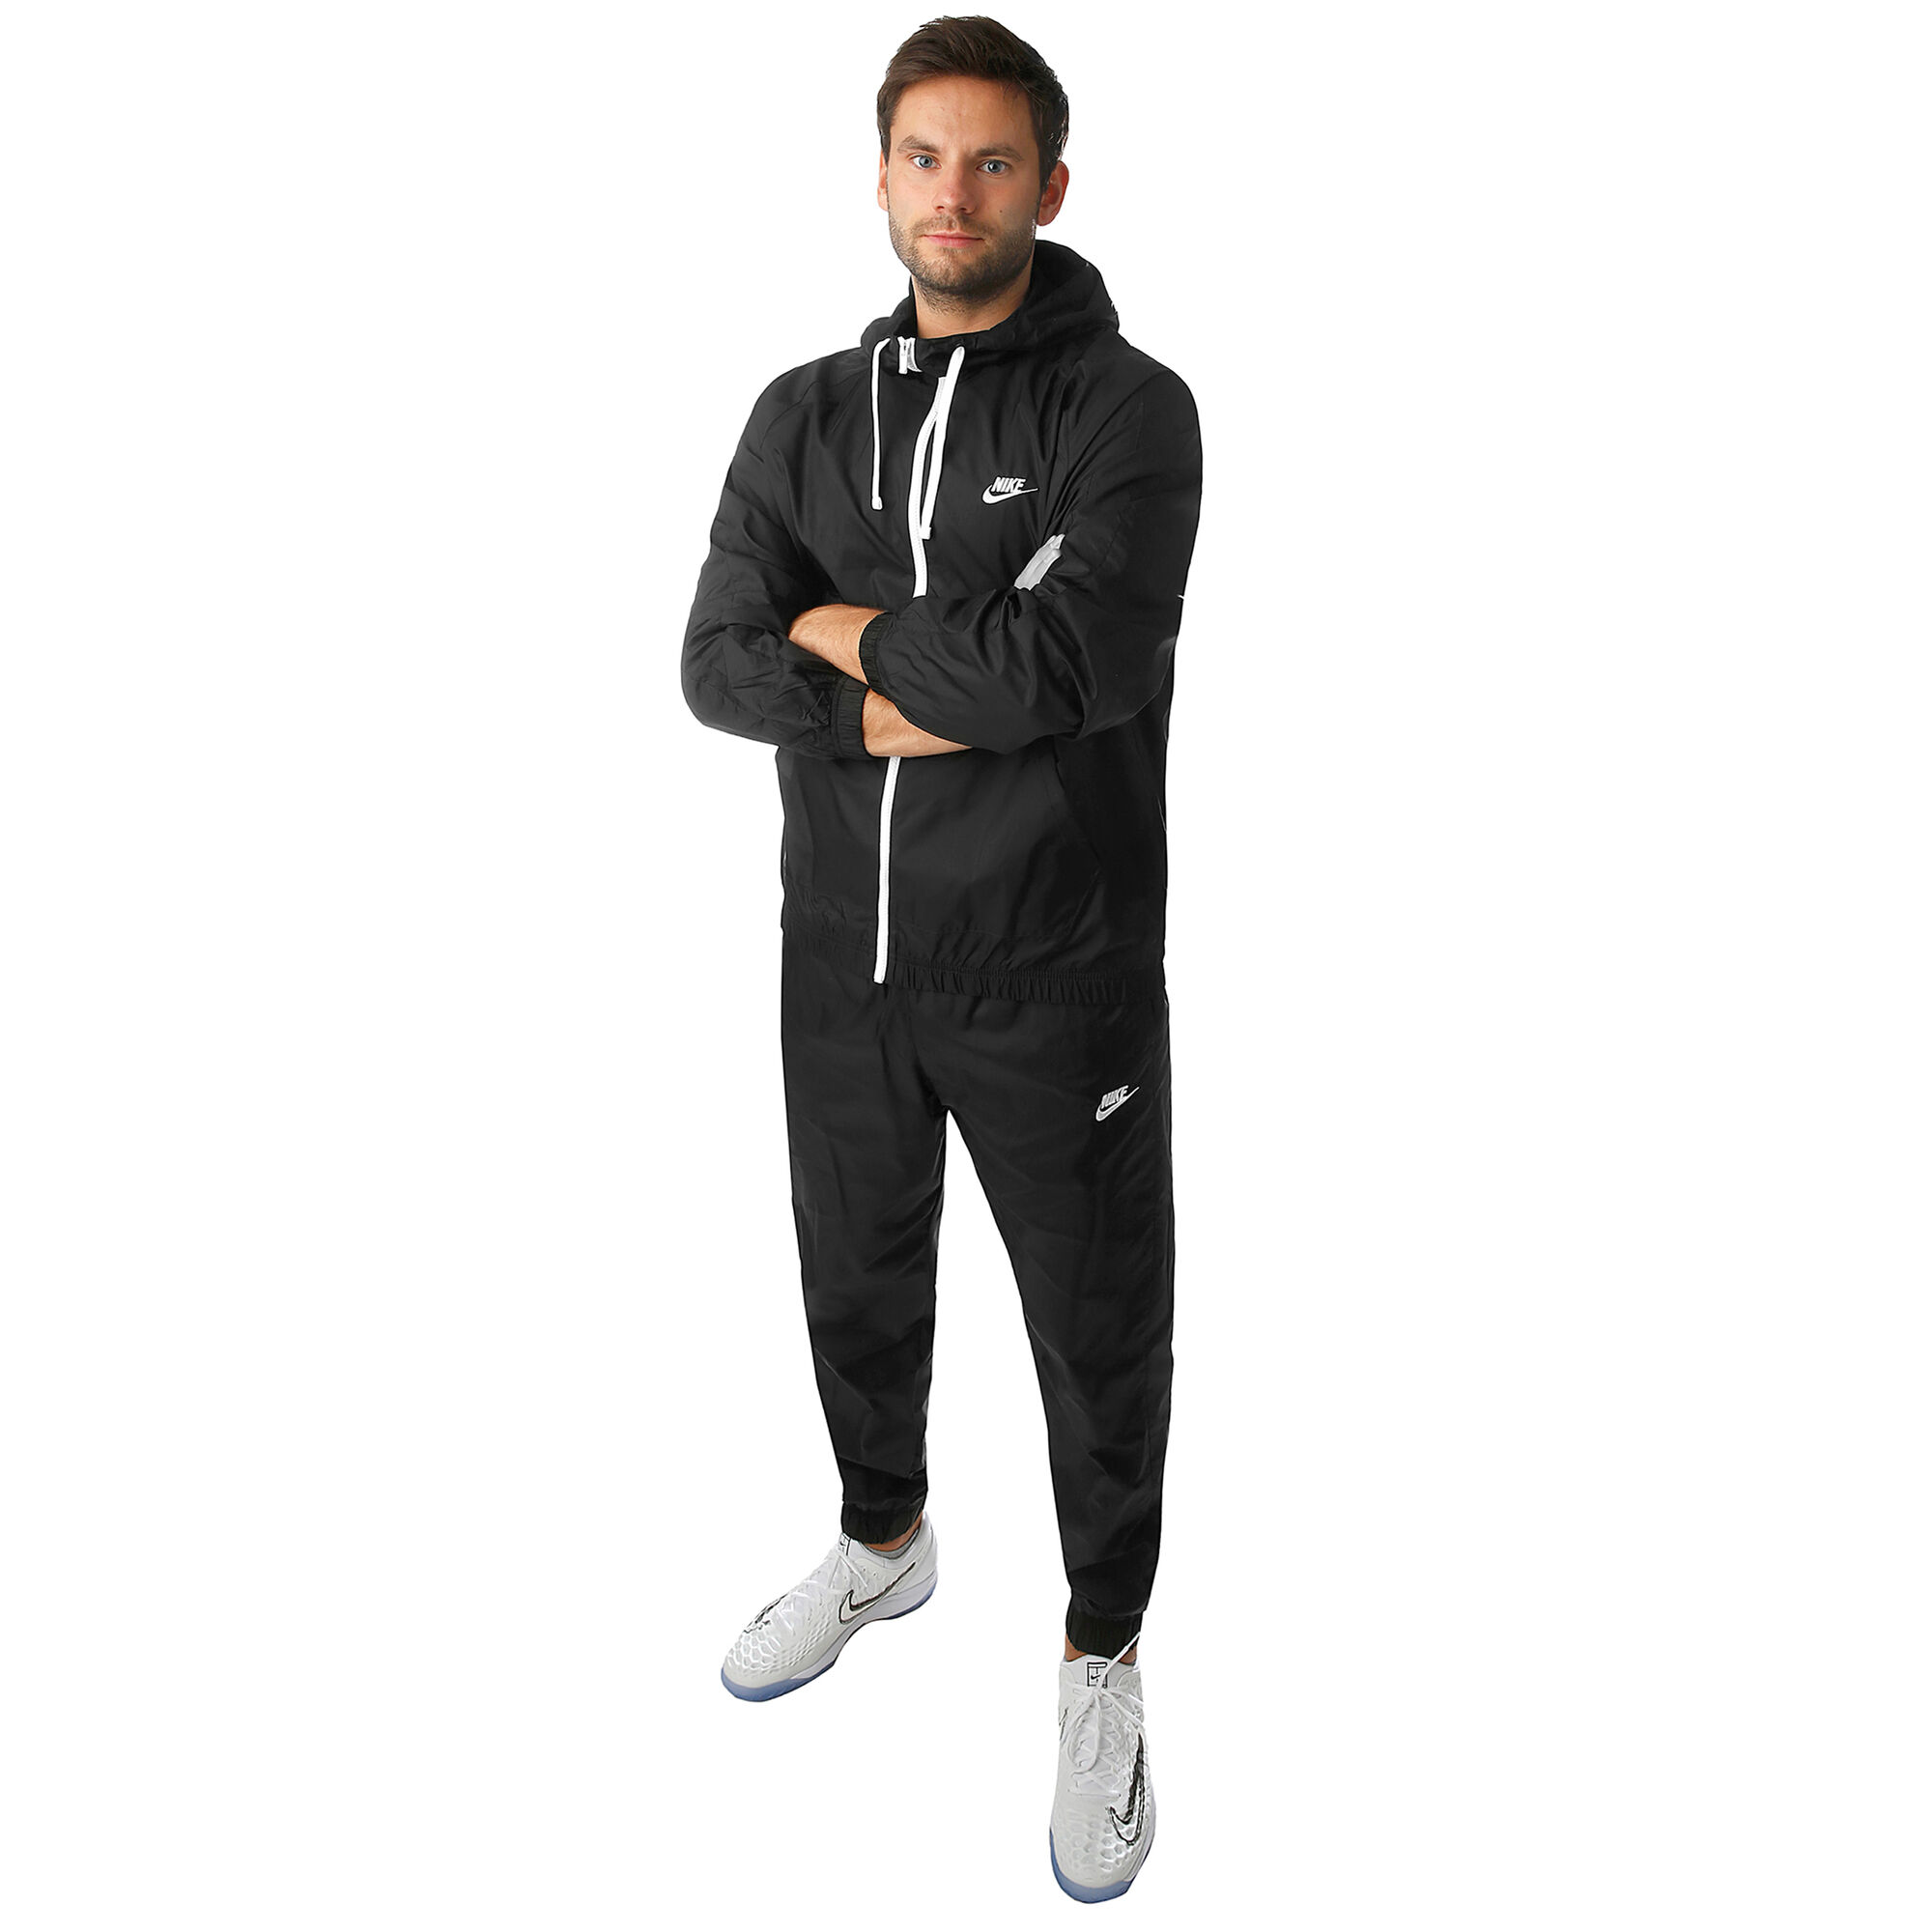 Nike Sportswear Woven Hooded Chándal Hombres - Negro, compra online Tennis-Point